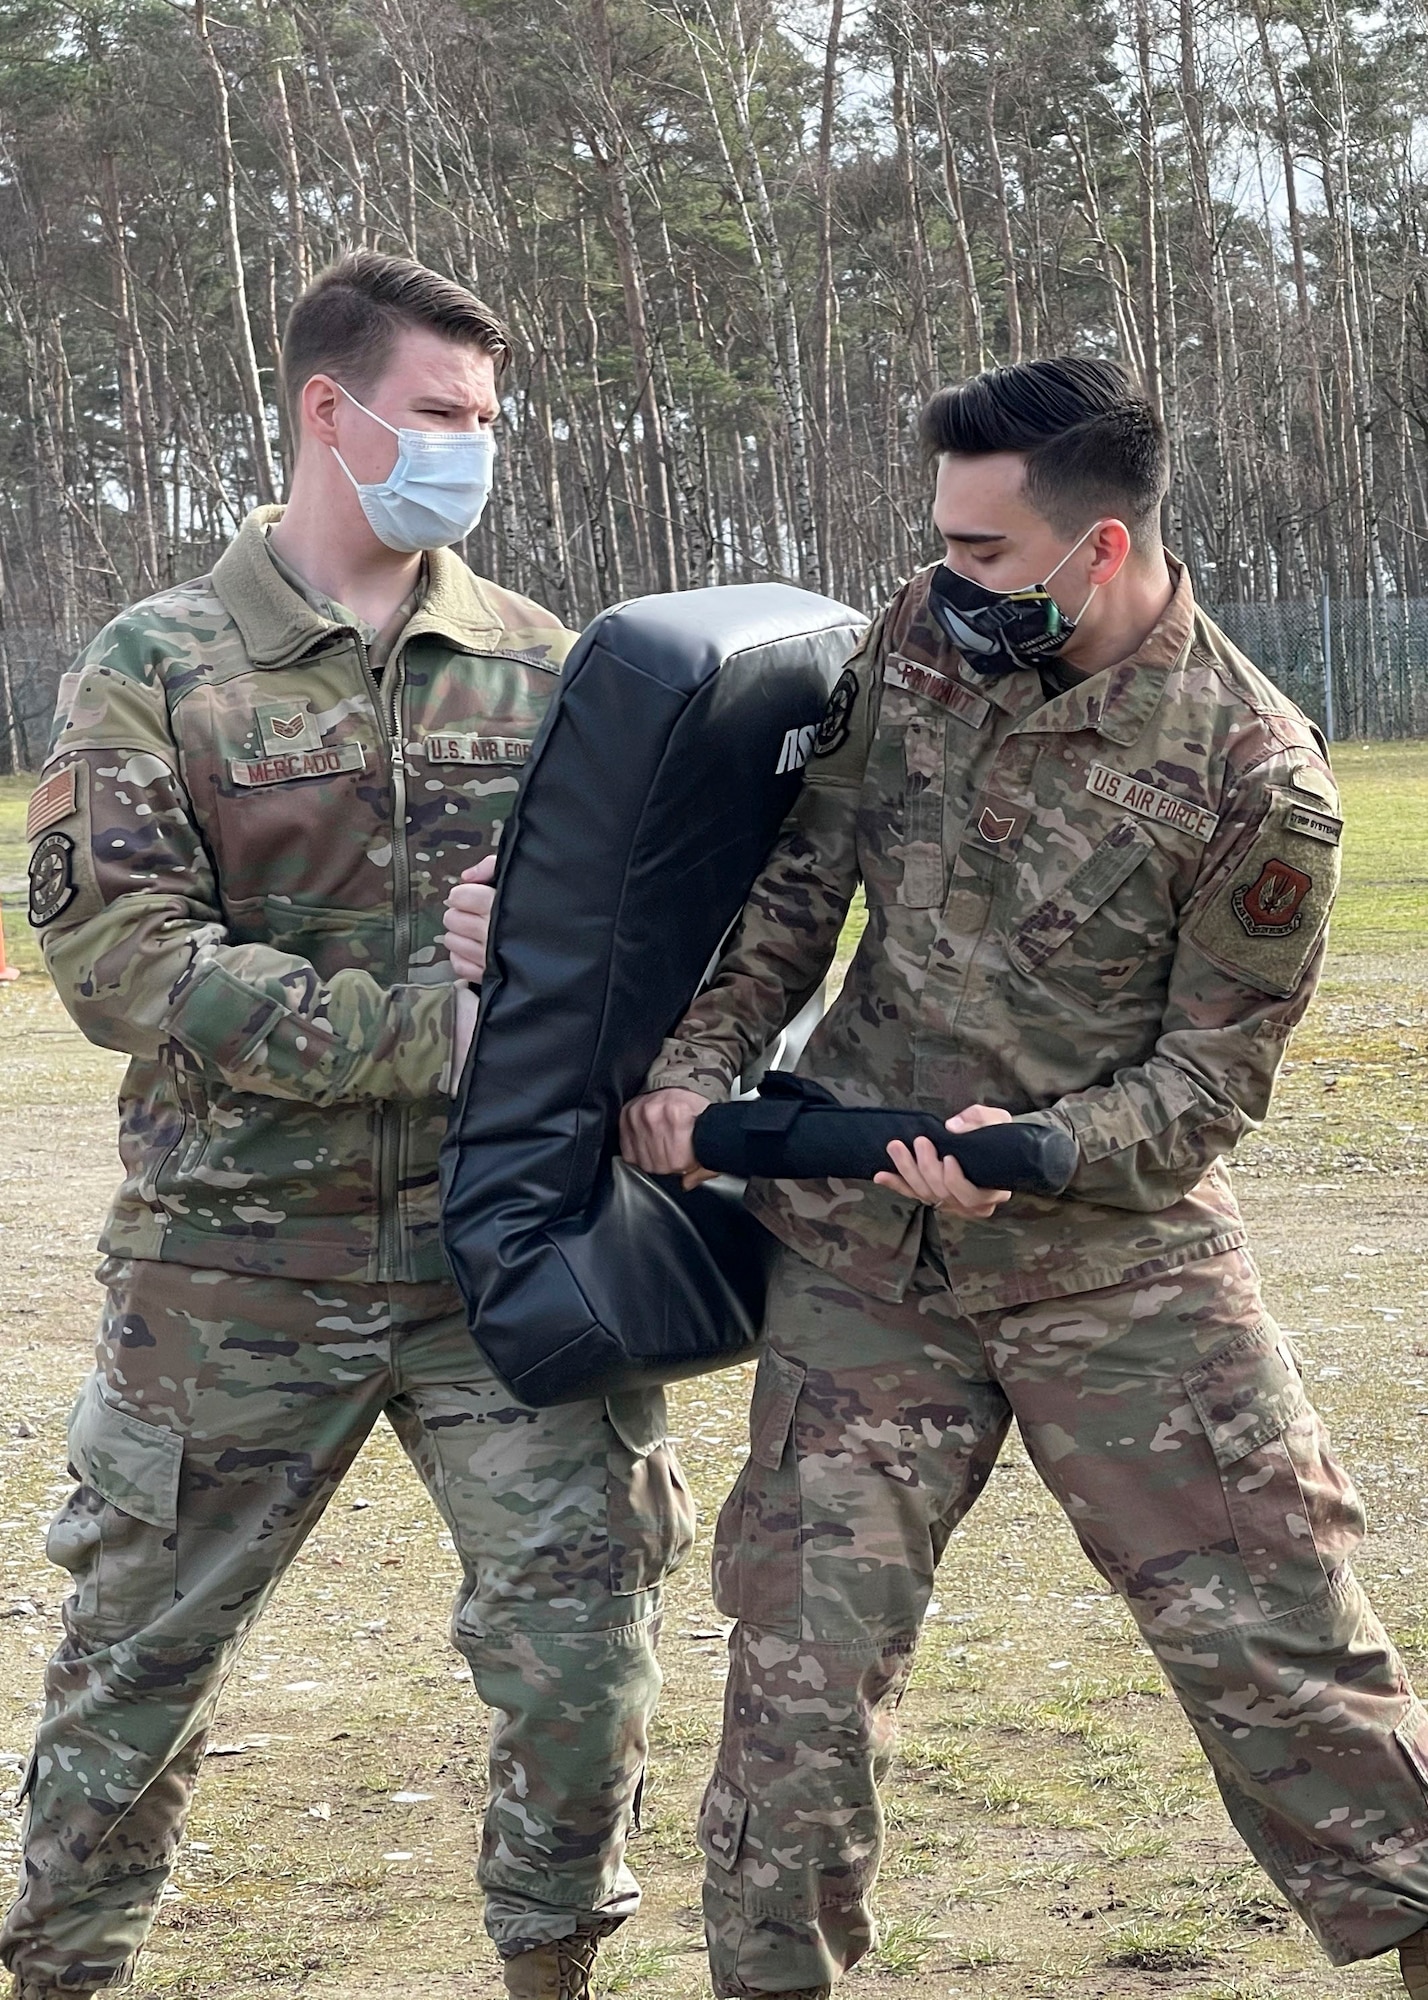 U.S. Air Force Staff Sgt. Brent Mercado, 701st Munitions Support Squadron custody forces specialist, left, and Tech. Sgt. Tyler Prowant, 701st MUNSS NCO in charge of cyber systems, participate in security forces augmentee training at Kleine Brogel Air Base, Belgium, Feb. 26, 2021. Kleine Brogel AB hosts augmentee training every quarter to maintain mission readiness and enhance capabilities amongst Airmen. (Courtesy photo)